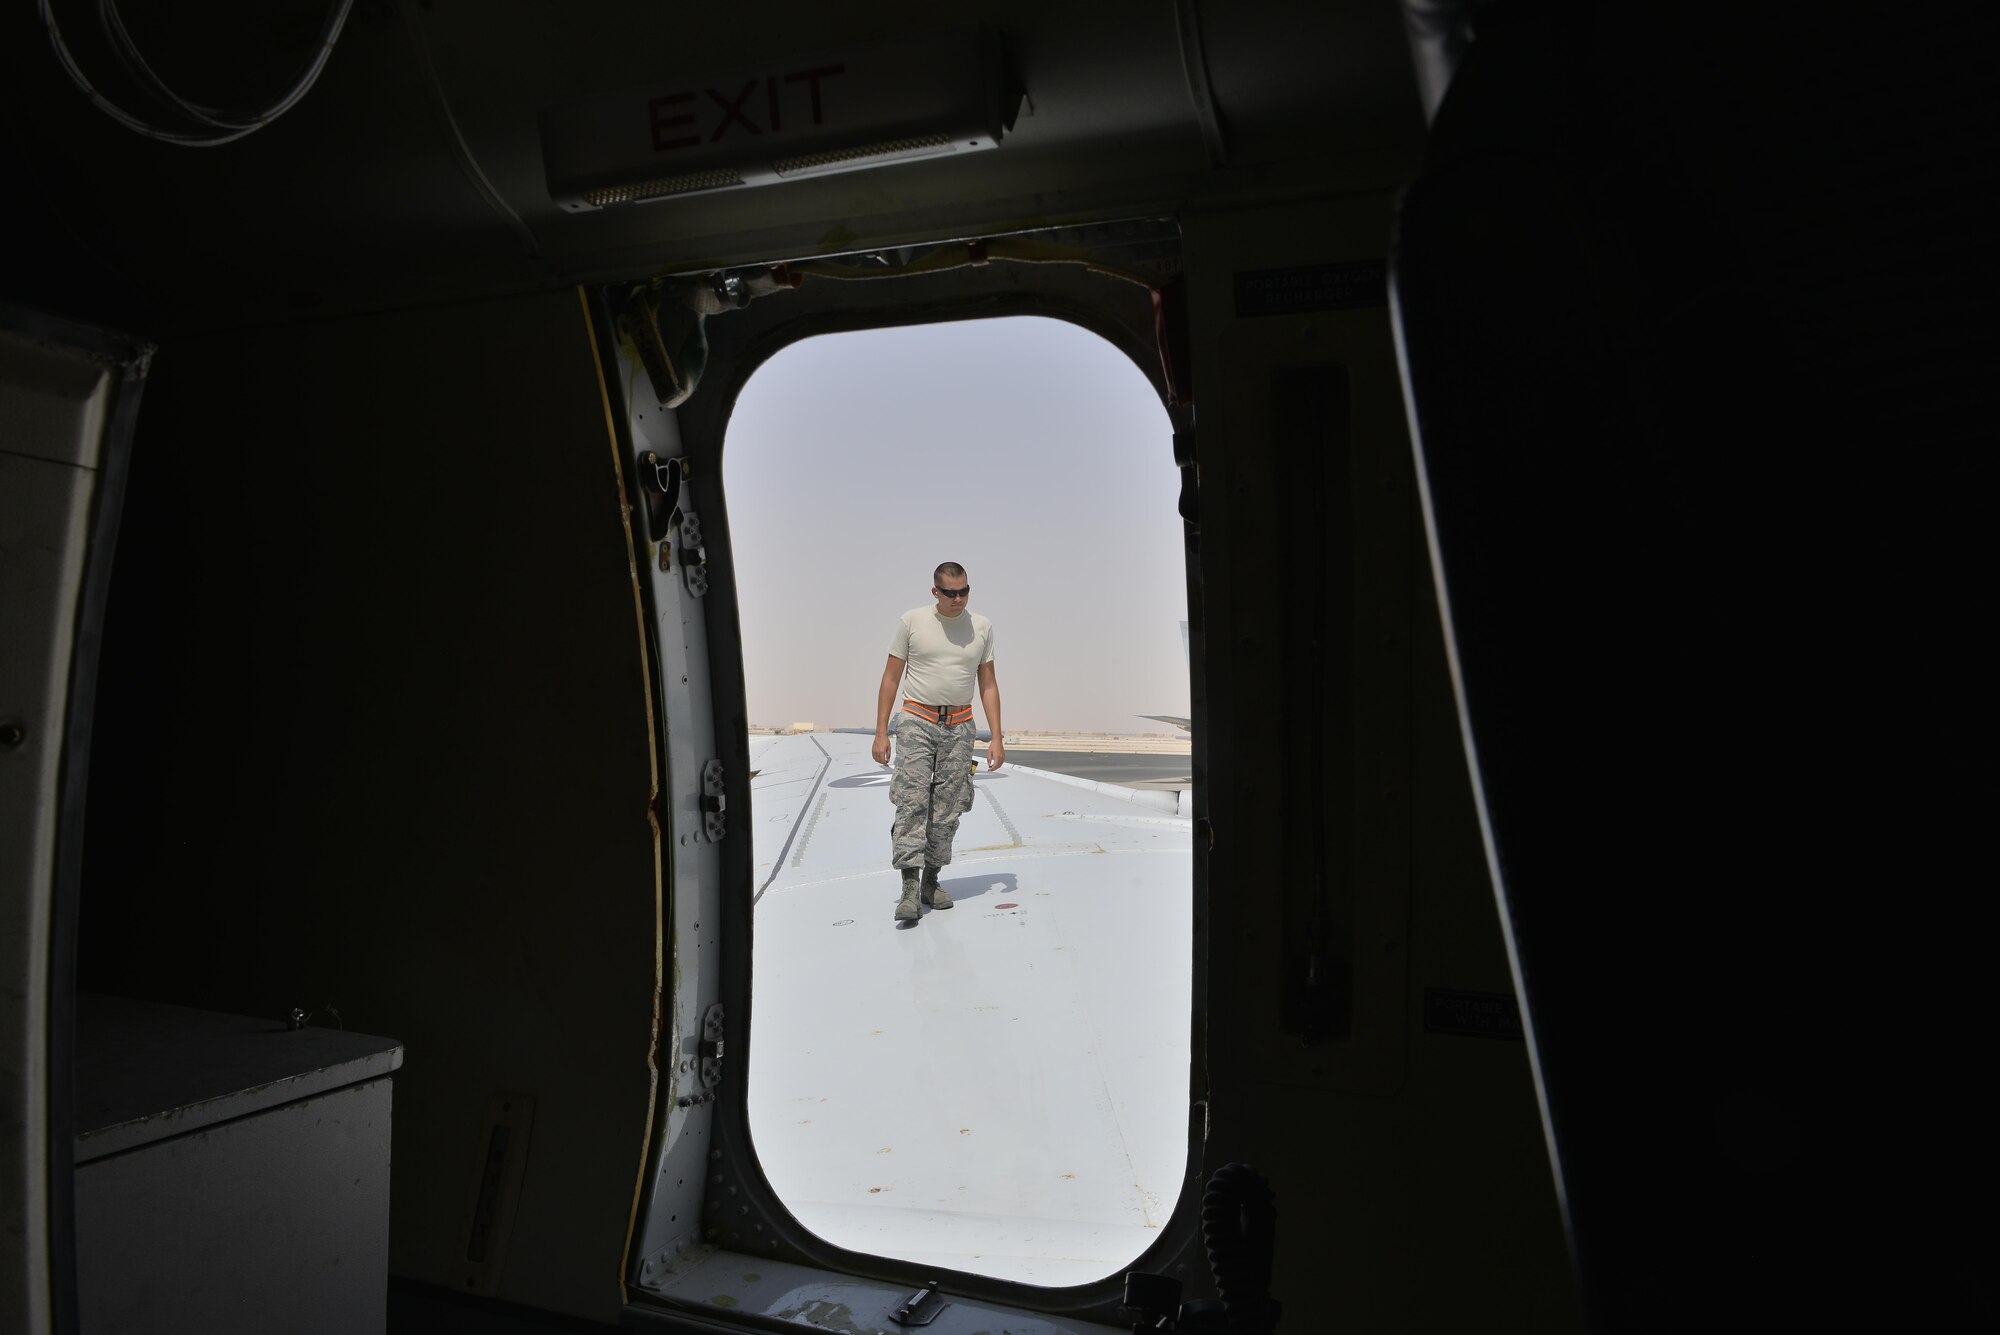 An Airman from the 7th Expeditionary Air Mobility Unit performs a routine post-flight maintenance inspection on the wing of a Boeing E-8C Joint Surveillance Target Attack Radar Systems for damages and minor repairs June 2, 2015 at Al Udeid Air Base, Qatar. The E-8C JSTARS and its active duty, guard and reserve service members conduct missions overseas to support operations on the war on terror. During this time JSTARS completed 100K combat hours by continually flying 24/7 for 11.4 years. (U.S. Air Force photo/Staff Sgt. Alexandre Montes)